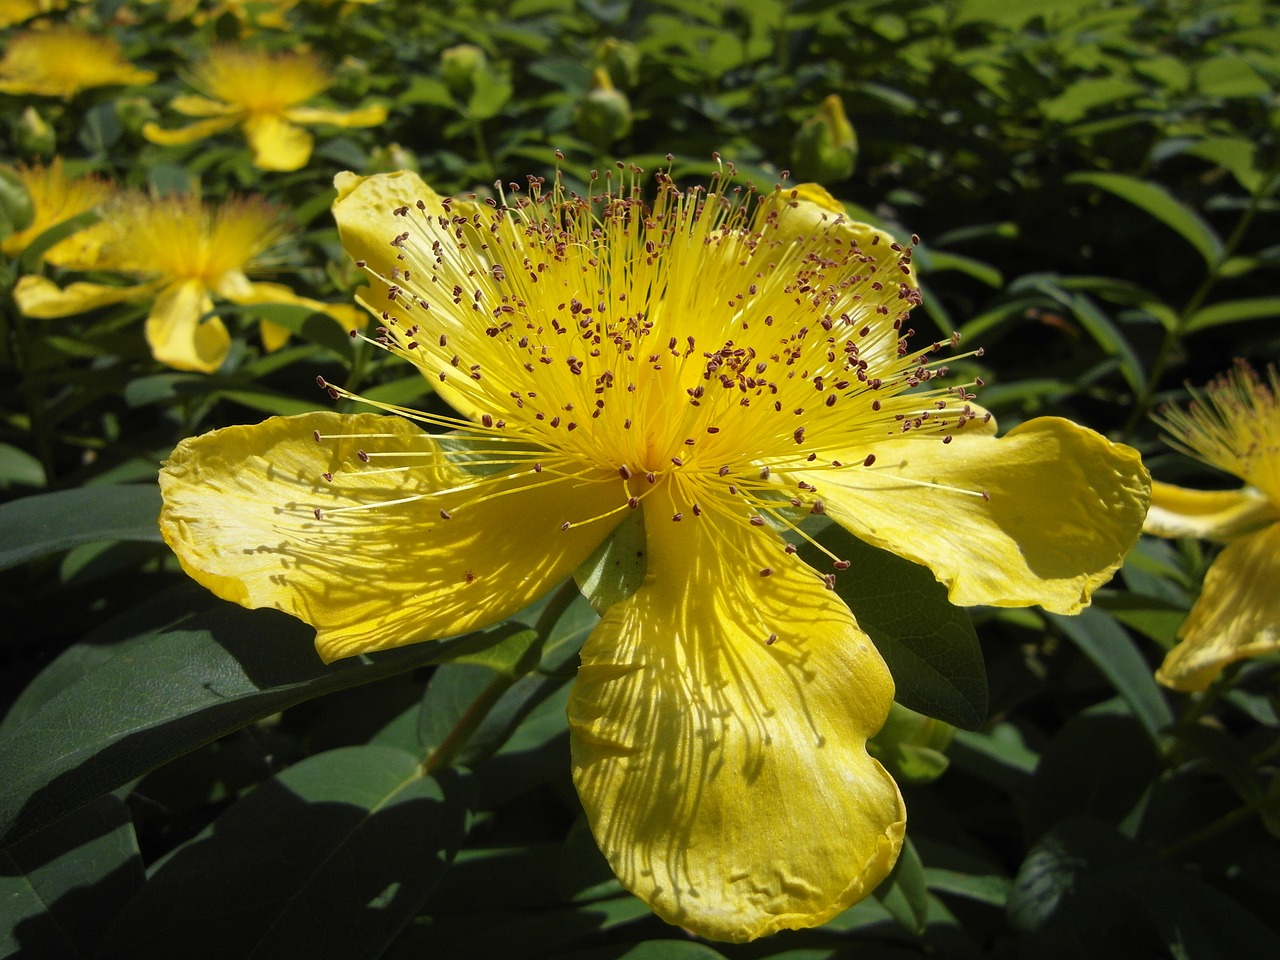 large cup st john's wort flower blossom free photo